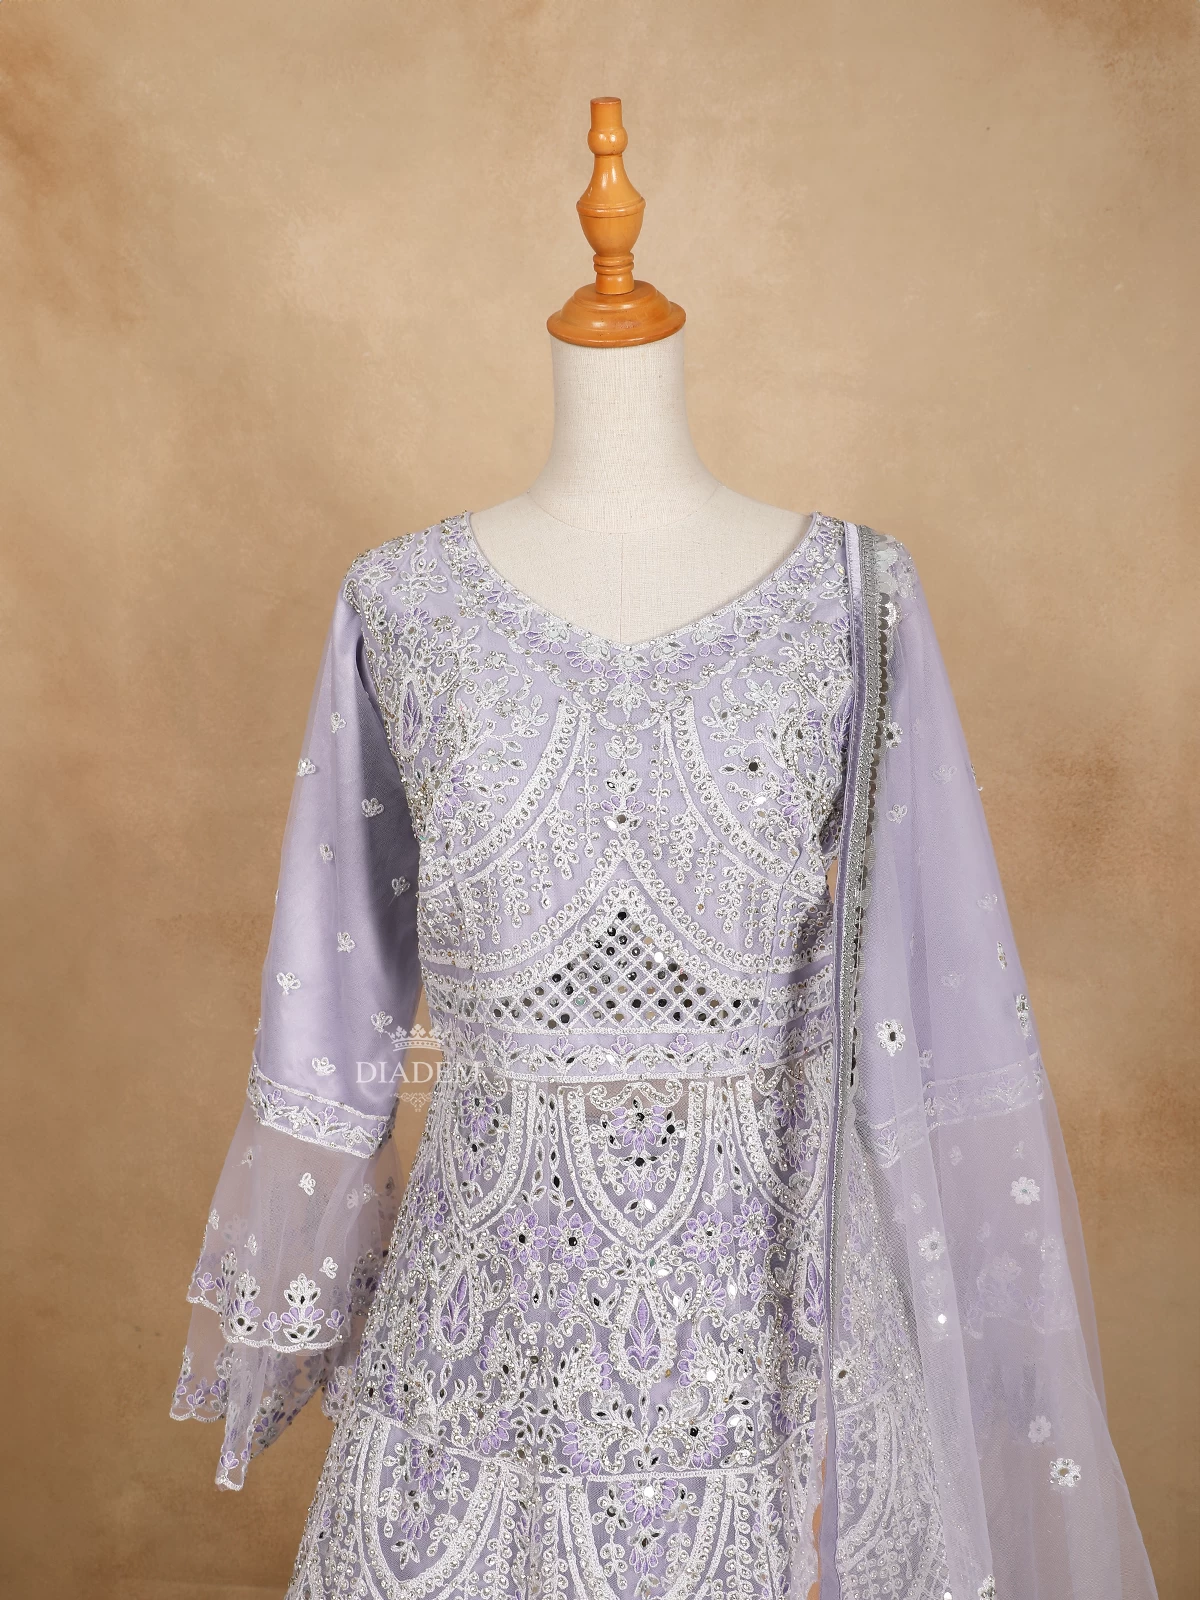 Lavender Net Lehenga Embellished With Threadwork Embroidery Paired With Matching Net Dupatta